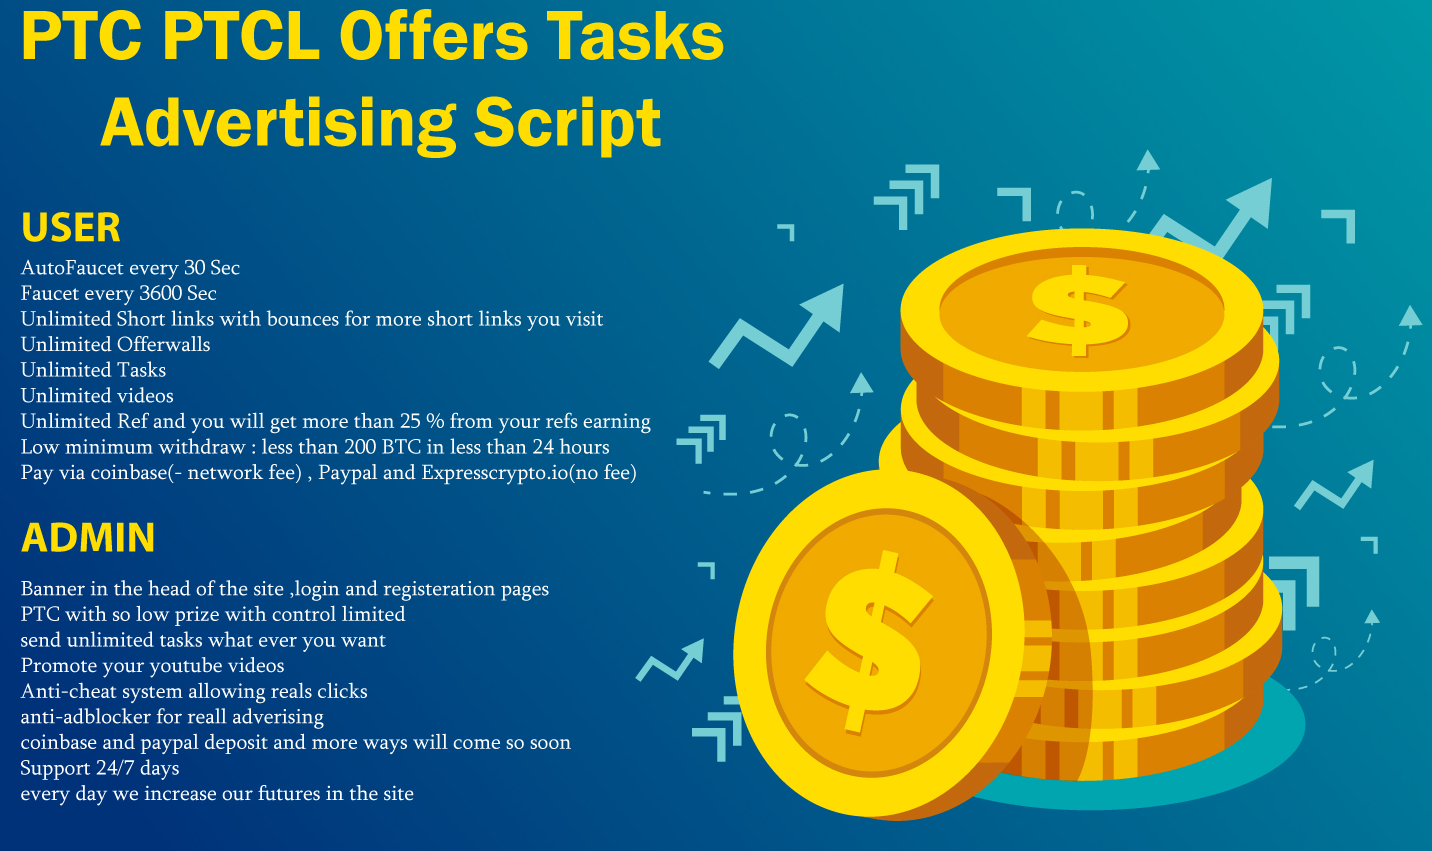 EasyClicks :GPT script PTC, PTCL, Offers, Tasks, Gaming, and Advertising Features